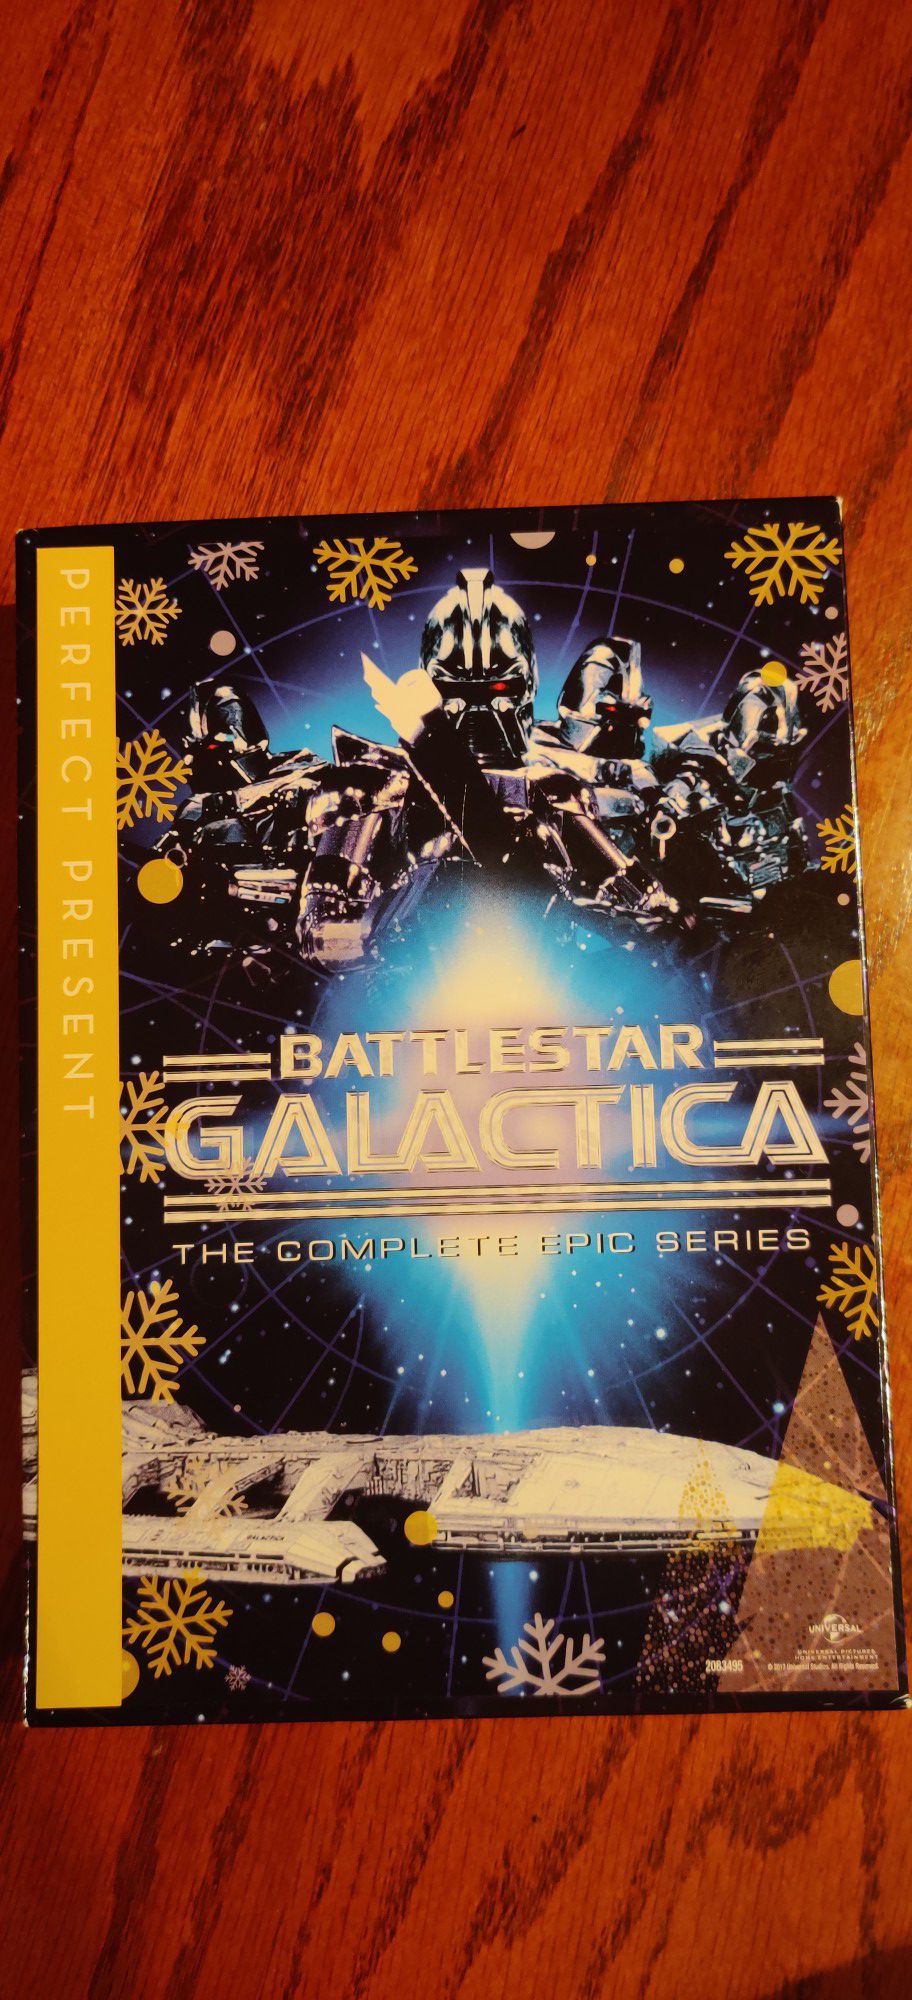 Battlestar Galactica the complete epic series.